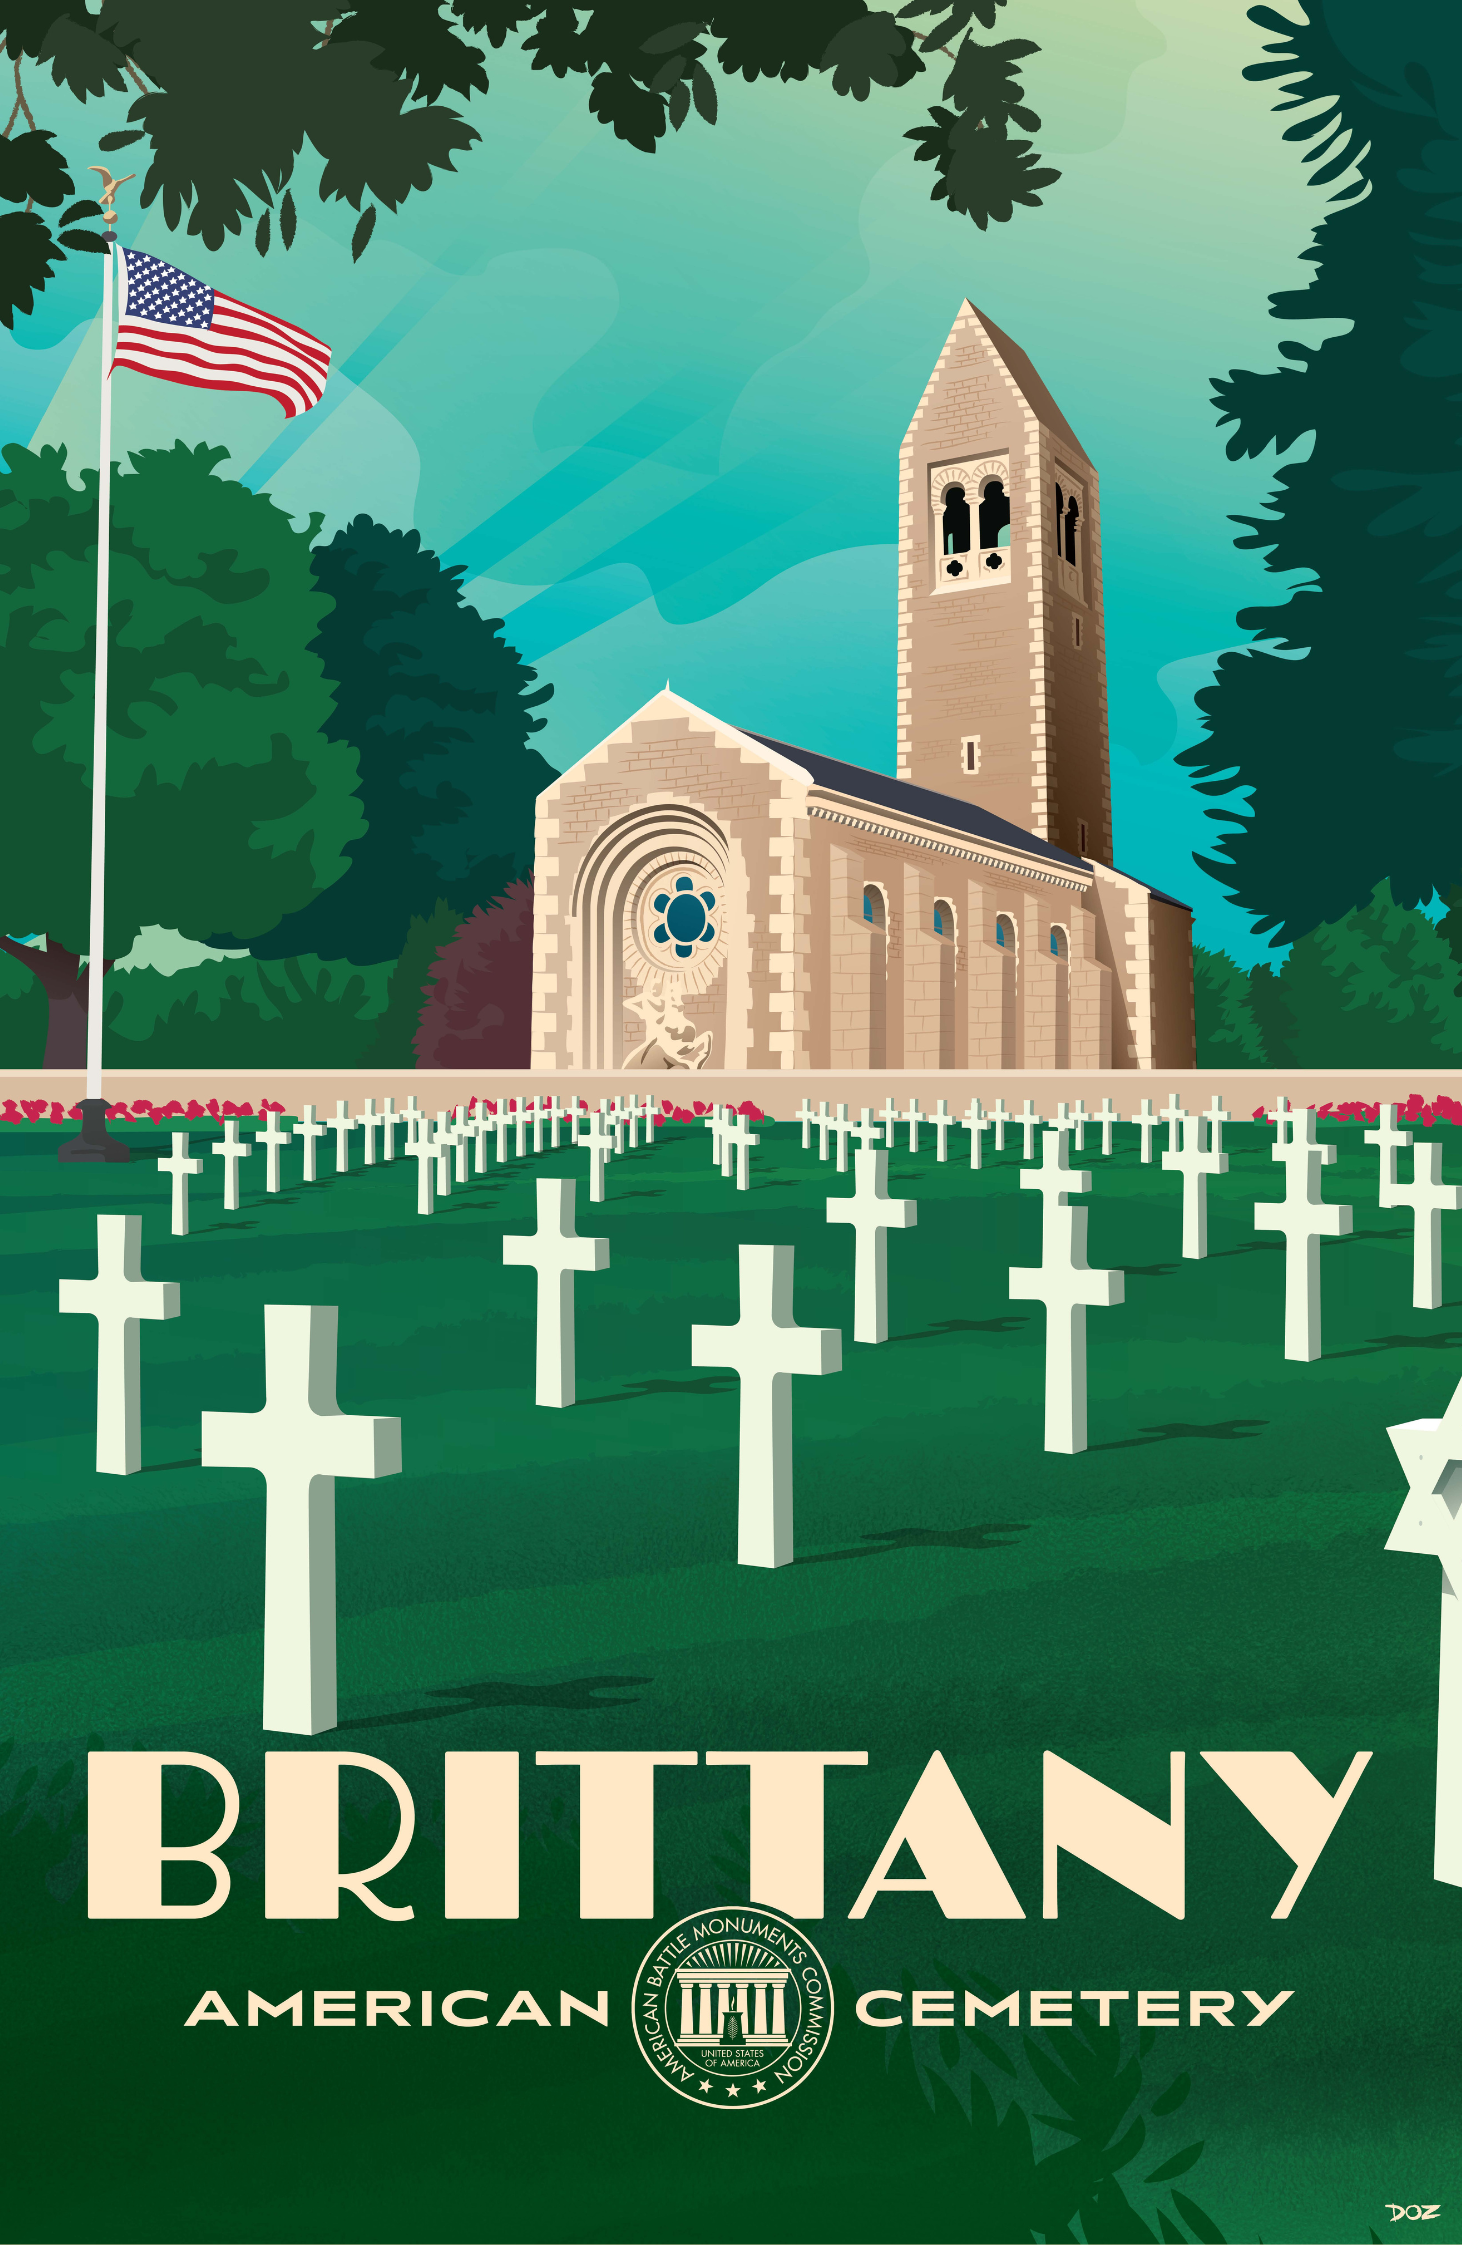 Vintage poster of Brittany American Cemetery